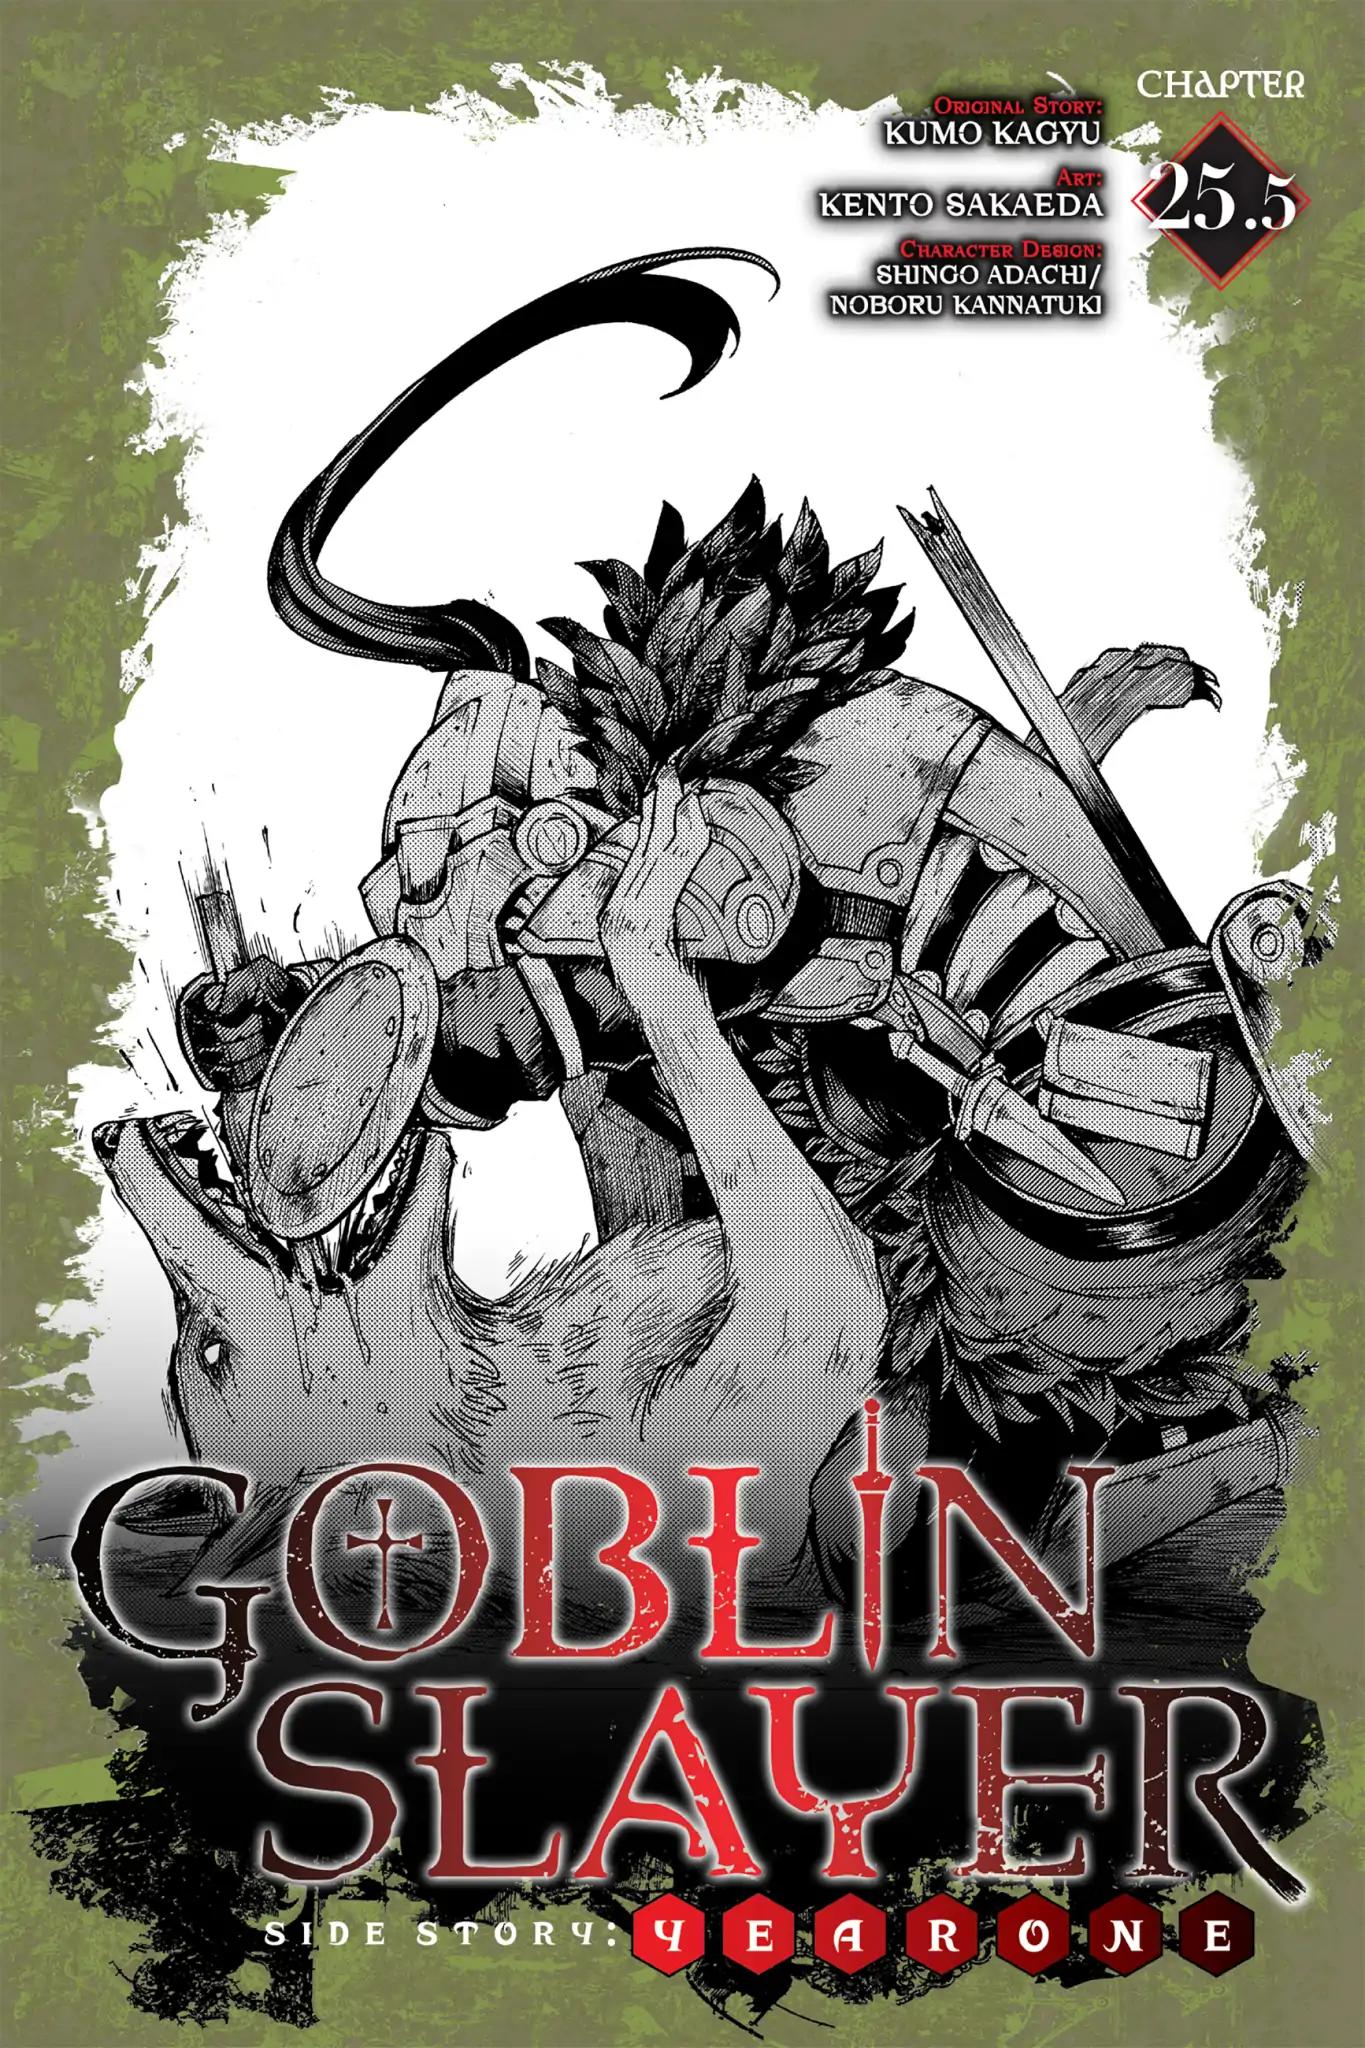 Goblin Slayer: Side Story Year One Vol.1 Chapter 25.5